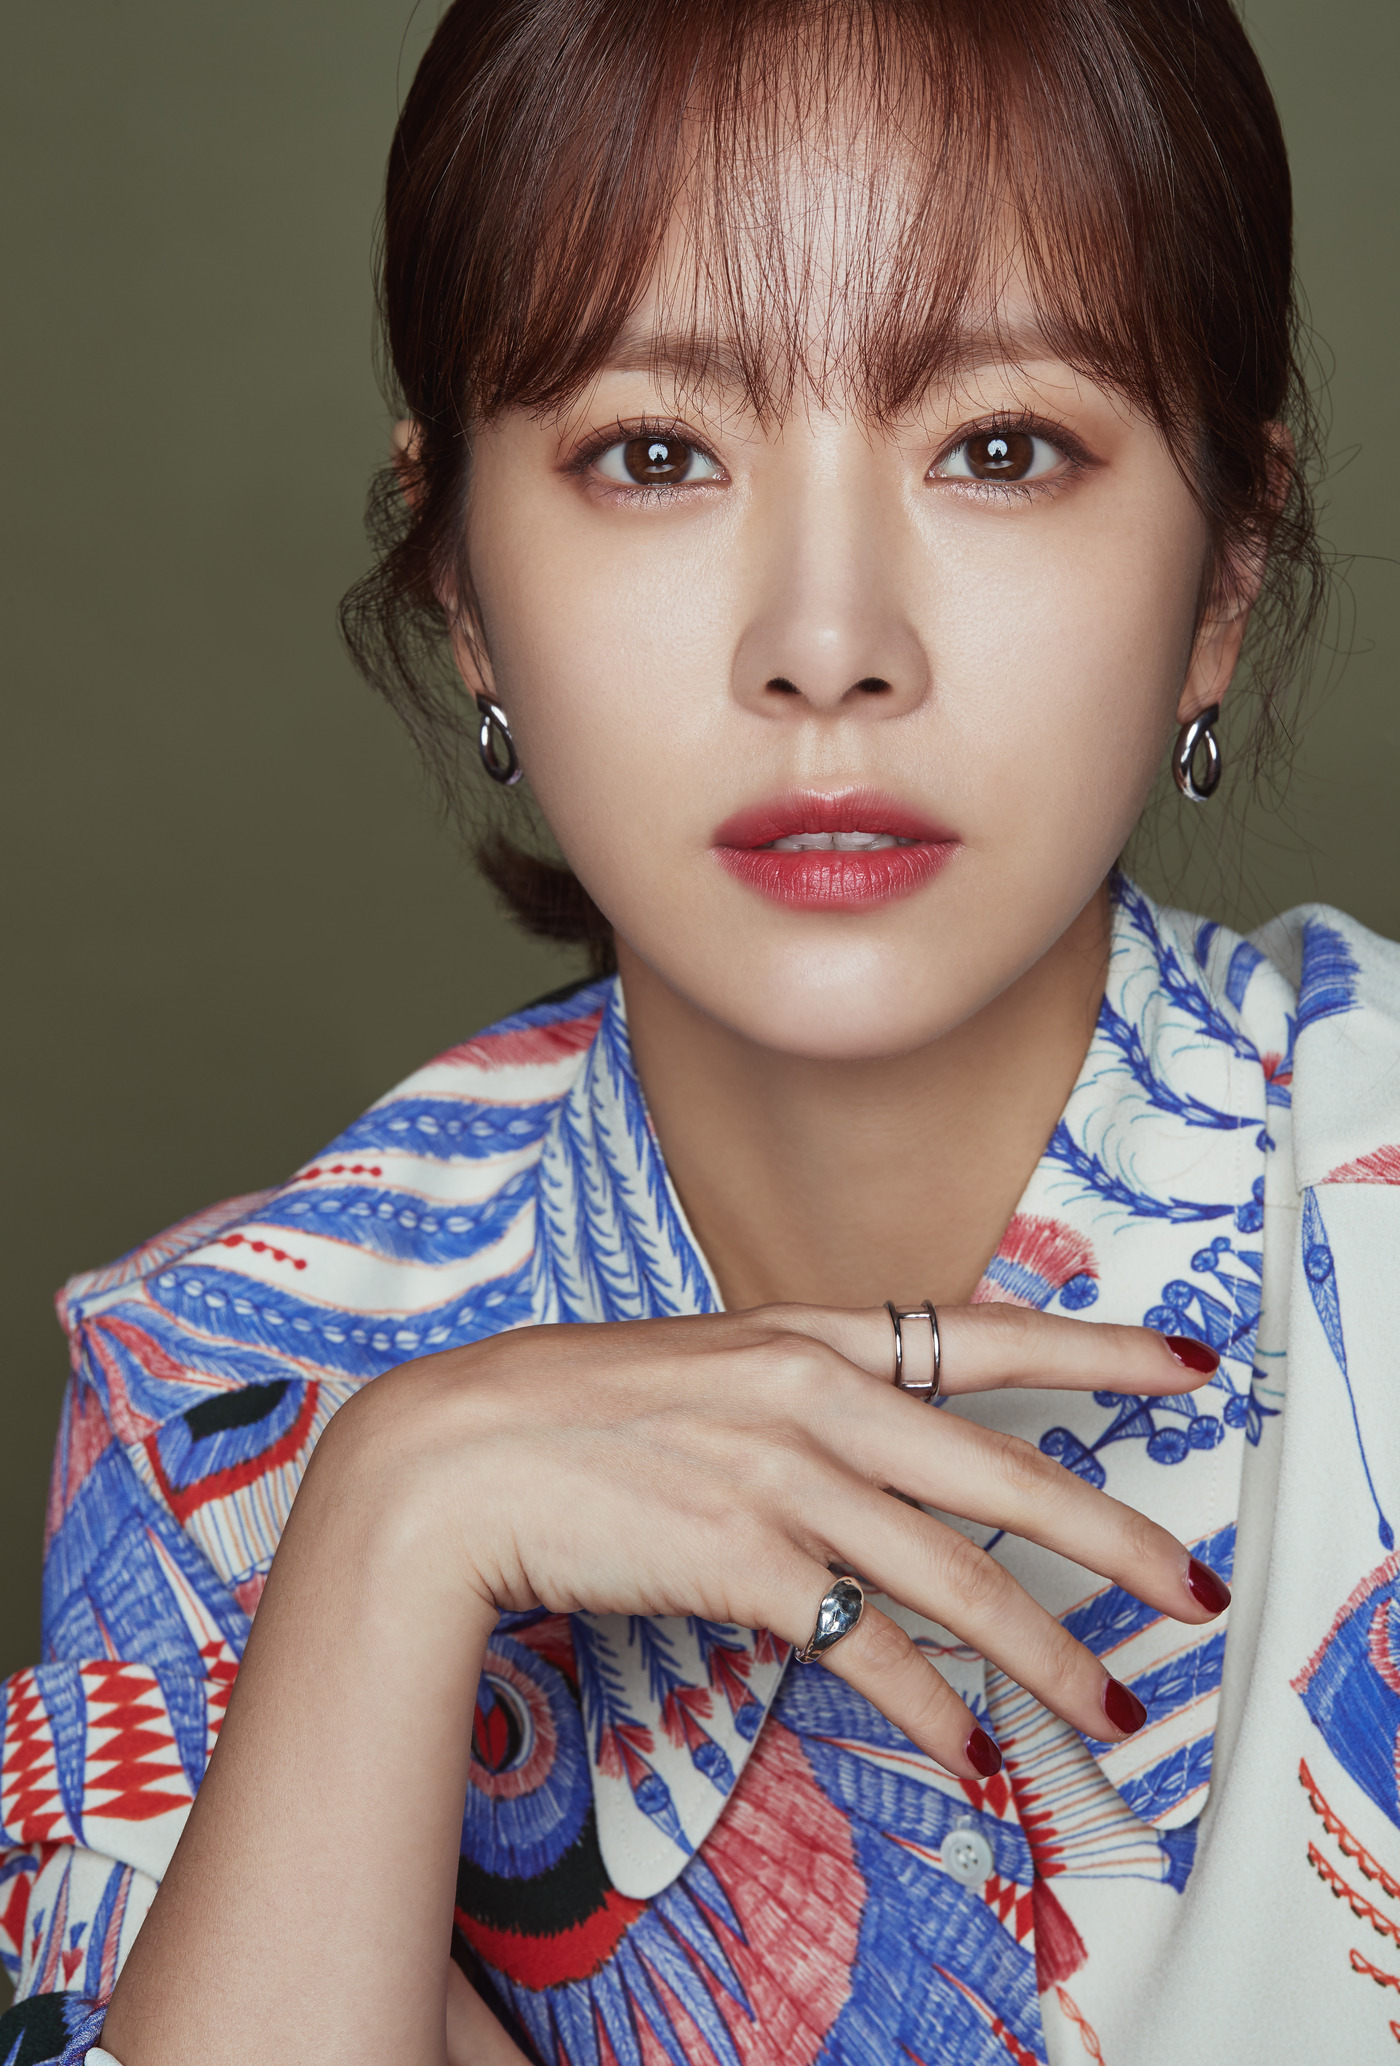 <p>Han Ji-min, who plays Baek Sang-ah in the movie Mitsuba (director Lee Ji-won), was interviewed at a cafe in Samcheong-dong, Jongno-gu, Seoul on November 1.</p><p>Mitsuba is a movie depicting what happens when a white woman who became a pastor in order to defend herself meets Ai Ji-eun, who has fallen into the world like her childhood. Han Ji-min became a prisoner at a young age and played the role of a white sailor who closed the door to the world.</p><p>On this day, Han Ji-min said, I have been constantly contemplating such a part of a piece of work, and I began to feel the thirst for similar characters at some point in time. Its not that Im not uncomfortable with the image that people think about me, its over-packed. </p><p>He said, There are times when the public thinks about me like this: Its not Im not like that. Its like a homework that needs to be solved, how to express the role given through the work in the future. I thought I should not do it. </p><p>Han Ji-min also said, I have been worried that if I do not get involved, I will fail if I feel uncomfortable in the first 5 to 10 minutes because I have tobacco and smoke. I have been worried about the image part for a long time. </p><p>Han Ji-min said, I play tobacco in The Age of Shadows, said Kim Ji-ung, a short god, but he wishes to have a really good time. When Mitsuba was first started by the public, I did my best to avoid such a thing because of the behavior and appearance of Baek Sang-ah. </p><p>As for the new acting challenge, It was so fun when I was about to do it. It was interesting to find out what I did not have while trying to challenge myself, and it was fun to get up before the press preview, he said. I was relieved because there were a lot more articles, and I was happy to be doing something new all the time. </p><p>Meanwhile, Mitsuba will be released on October 11th.</p>